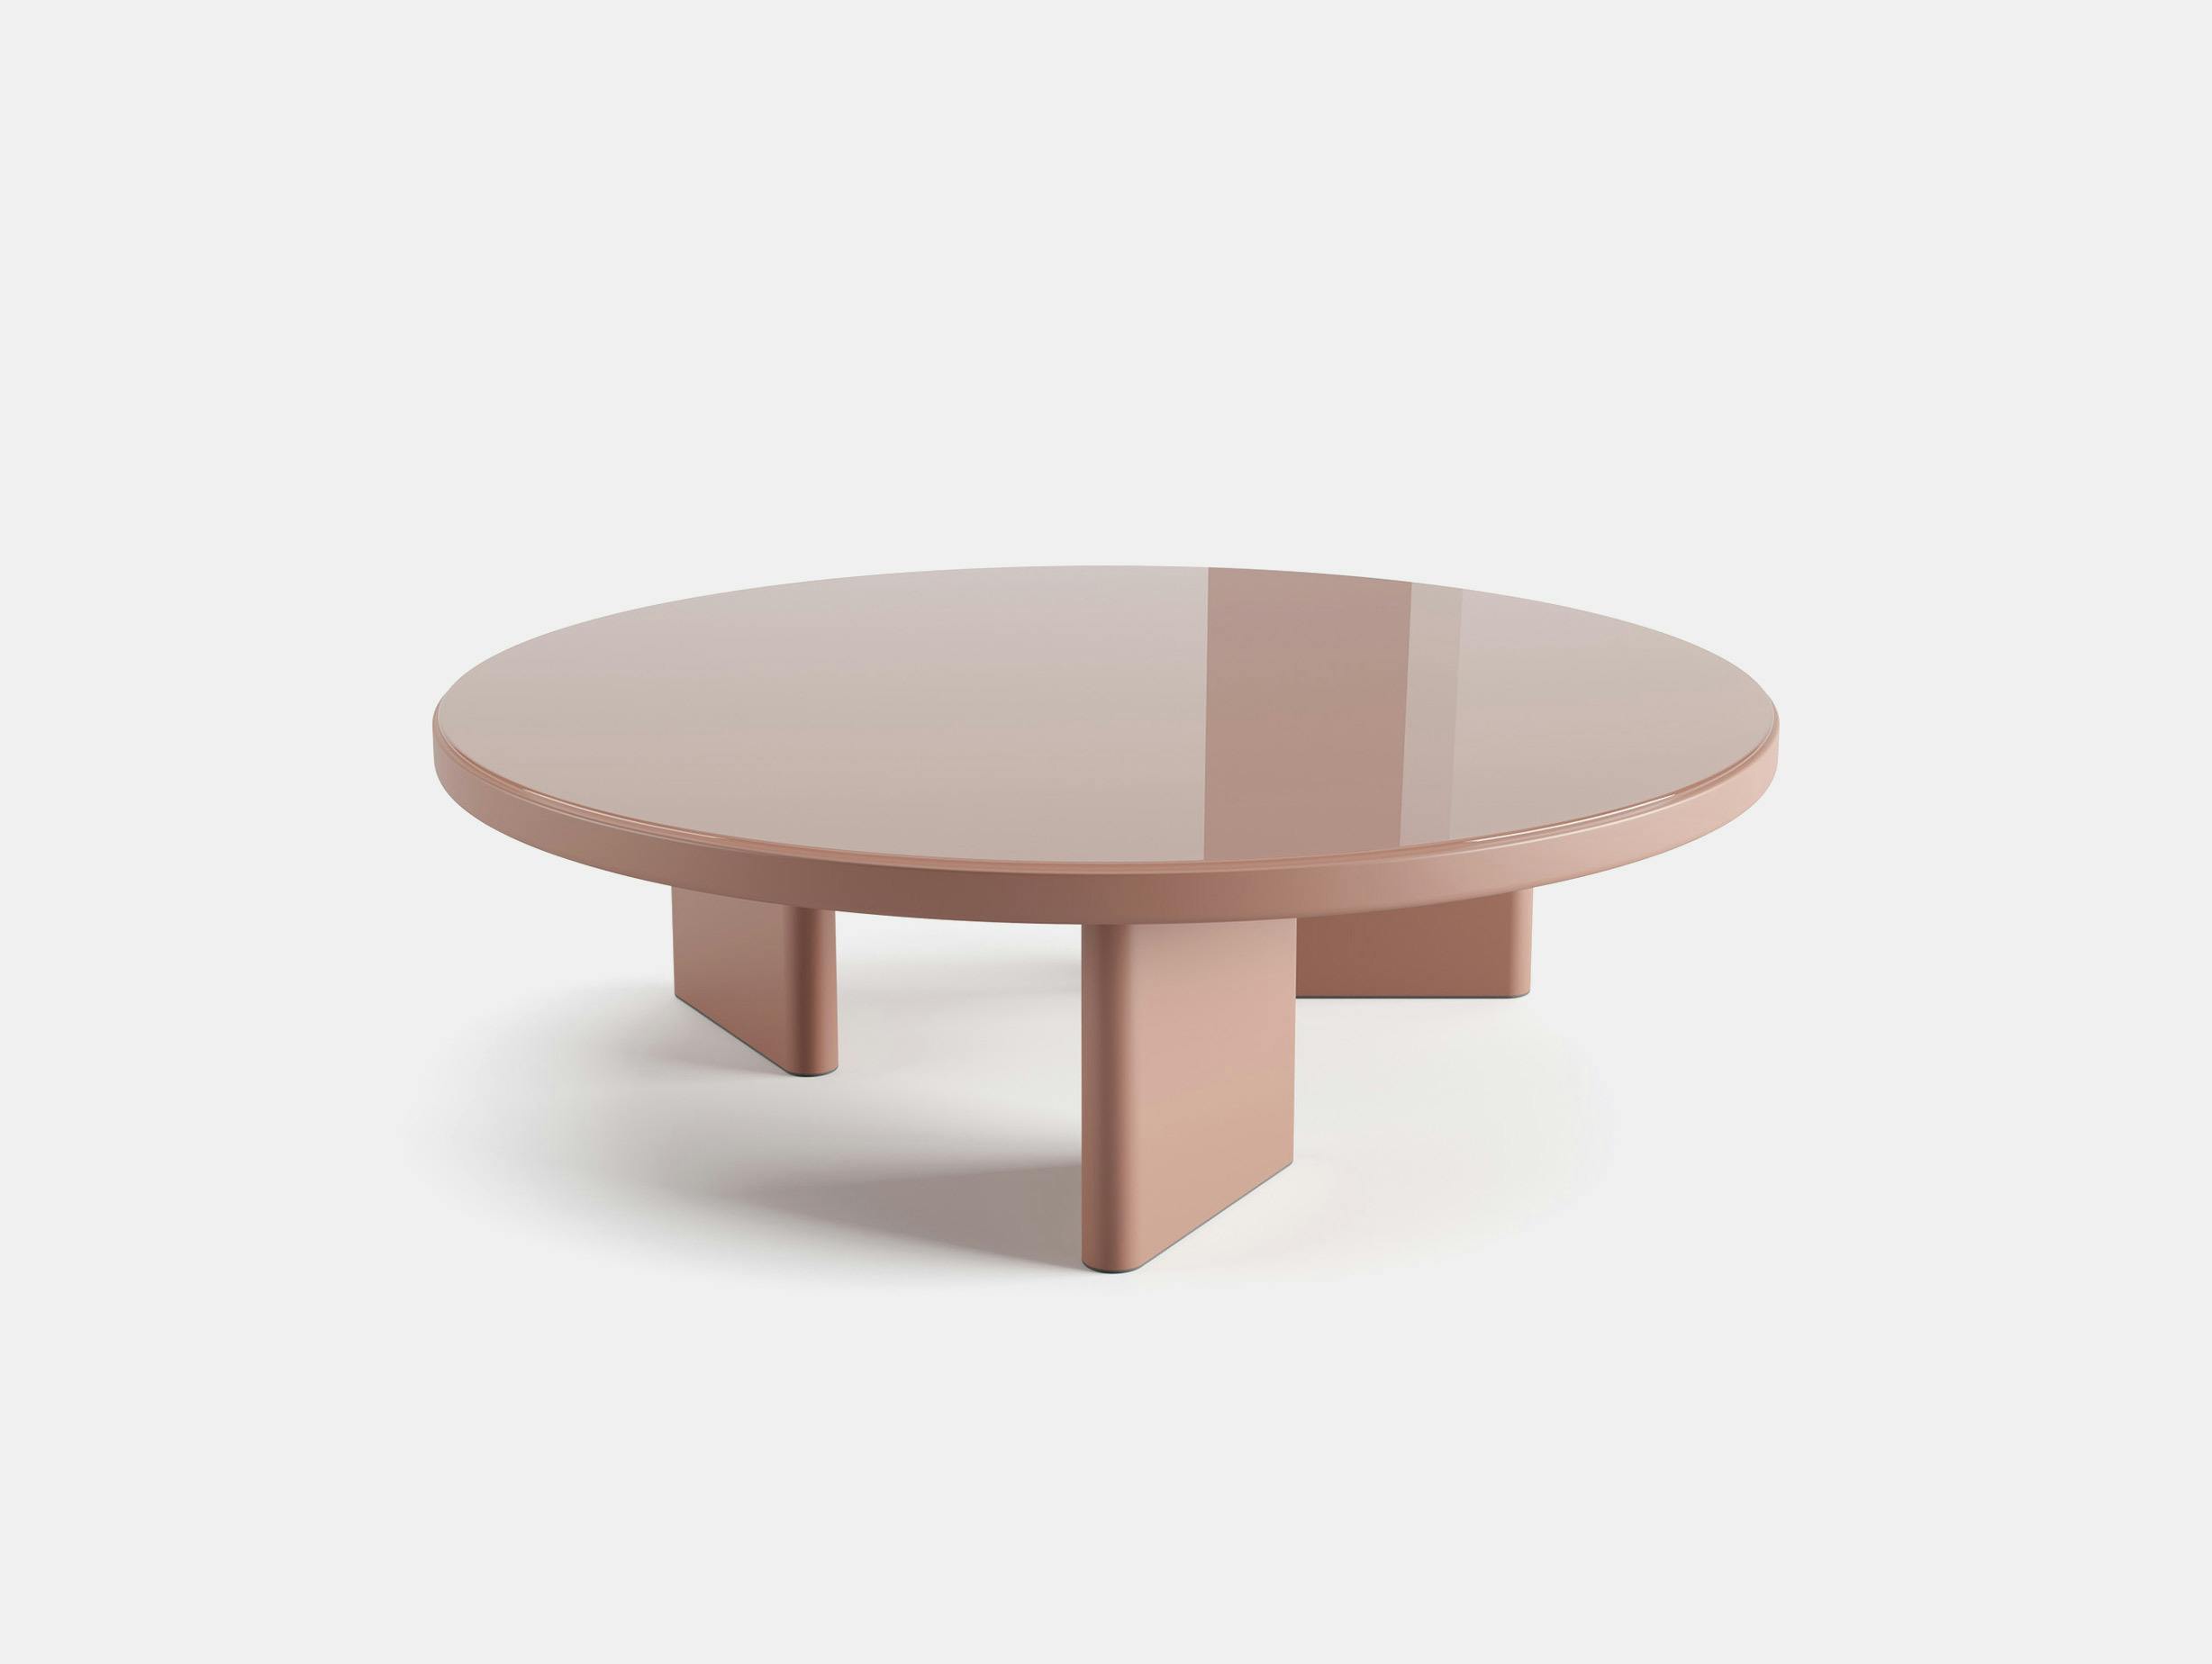 Arper Doshi Levien Roopa Coffee Table Round V78 Pink Jaipur 1